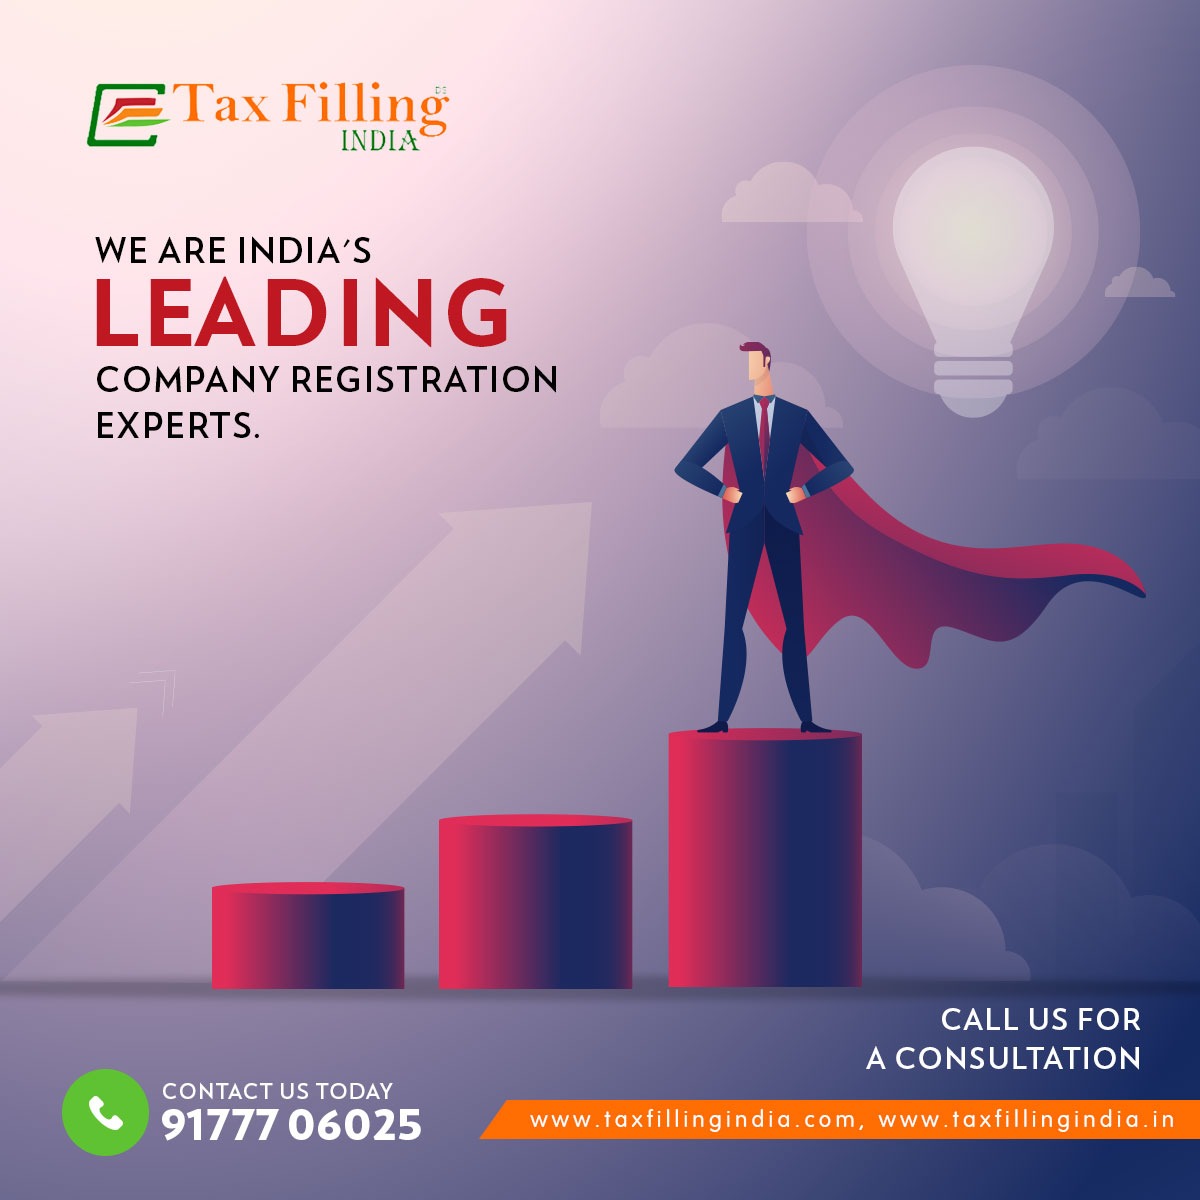 Thinking to start your #own #business,
we undertake all types of #company #registrations,
• Company Registration
• #MSME Registration
• #Startup Registration
• #Trademark Registration
👉 Contact us today to file your ITR
📲 +91 9177706025
#gst #GSTRegistration #GST #GSTFiling